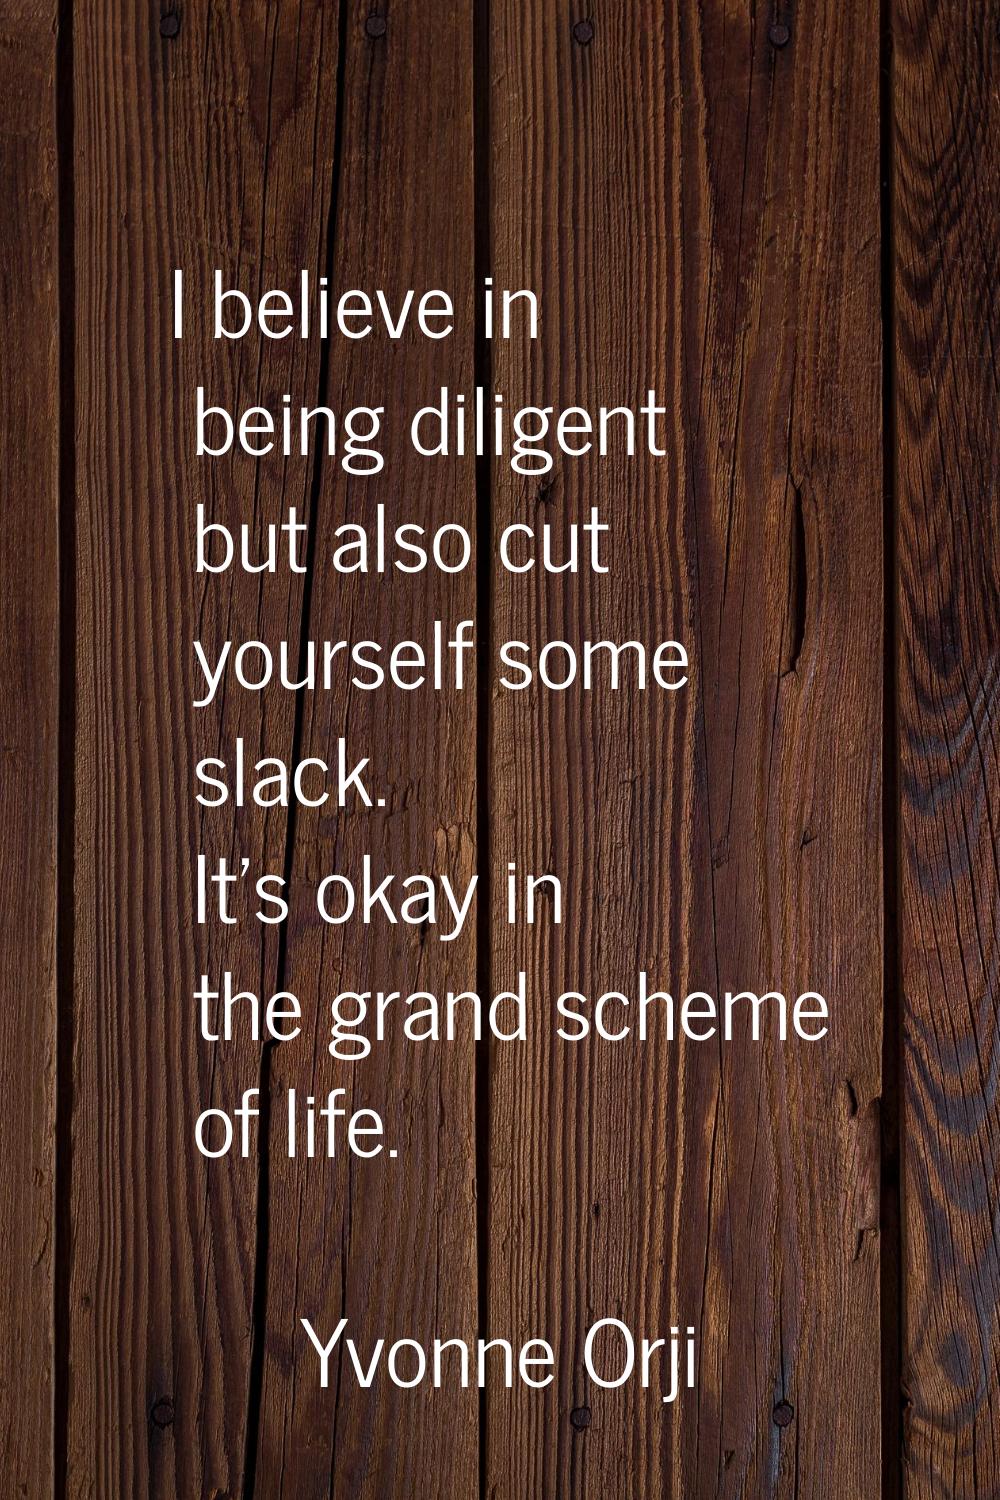 I believe in being diligent but also cut yourself some slack. It's okay in the grand scheme of life